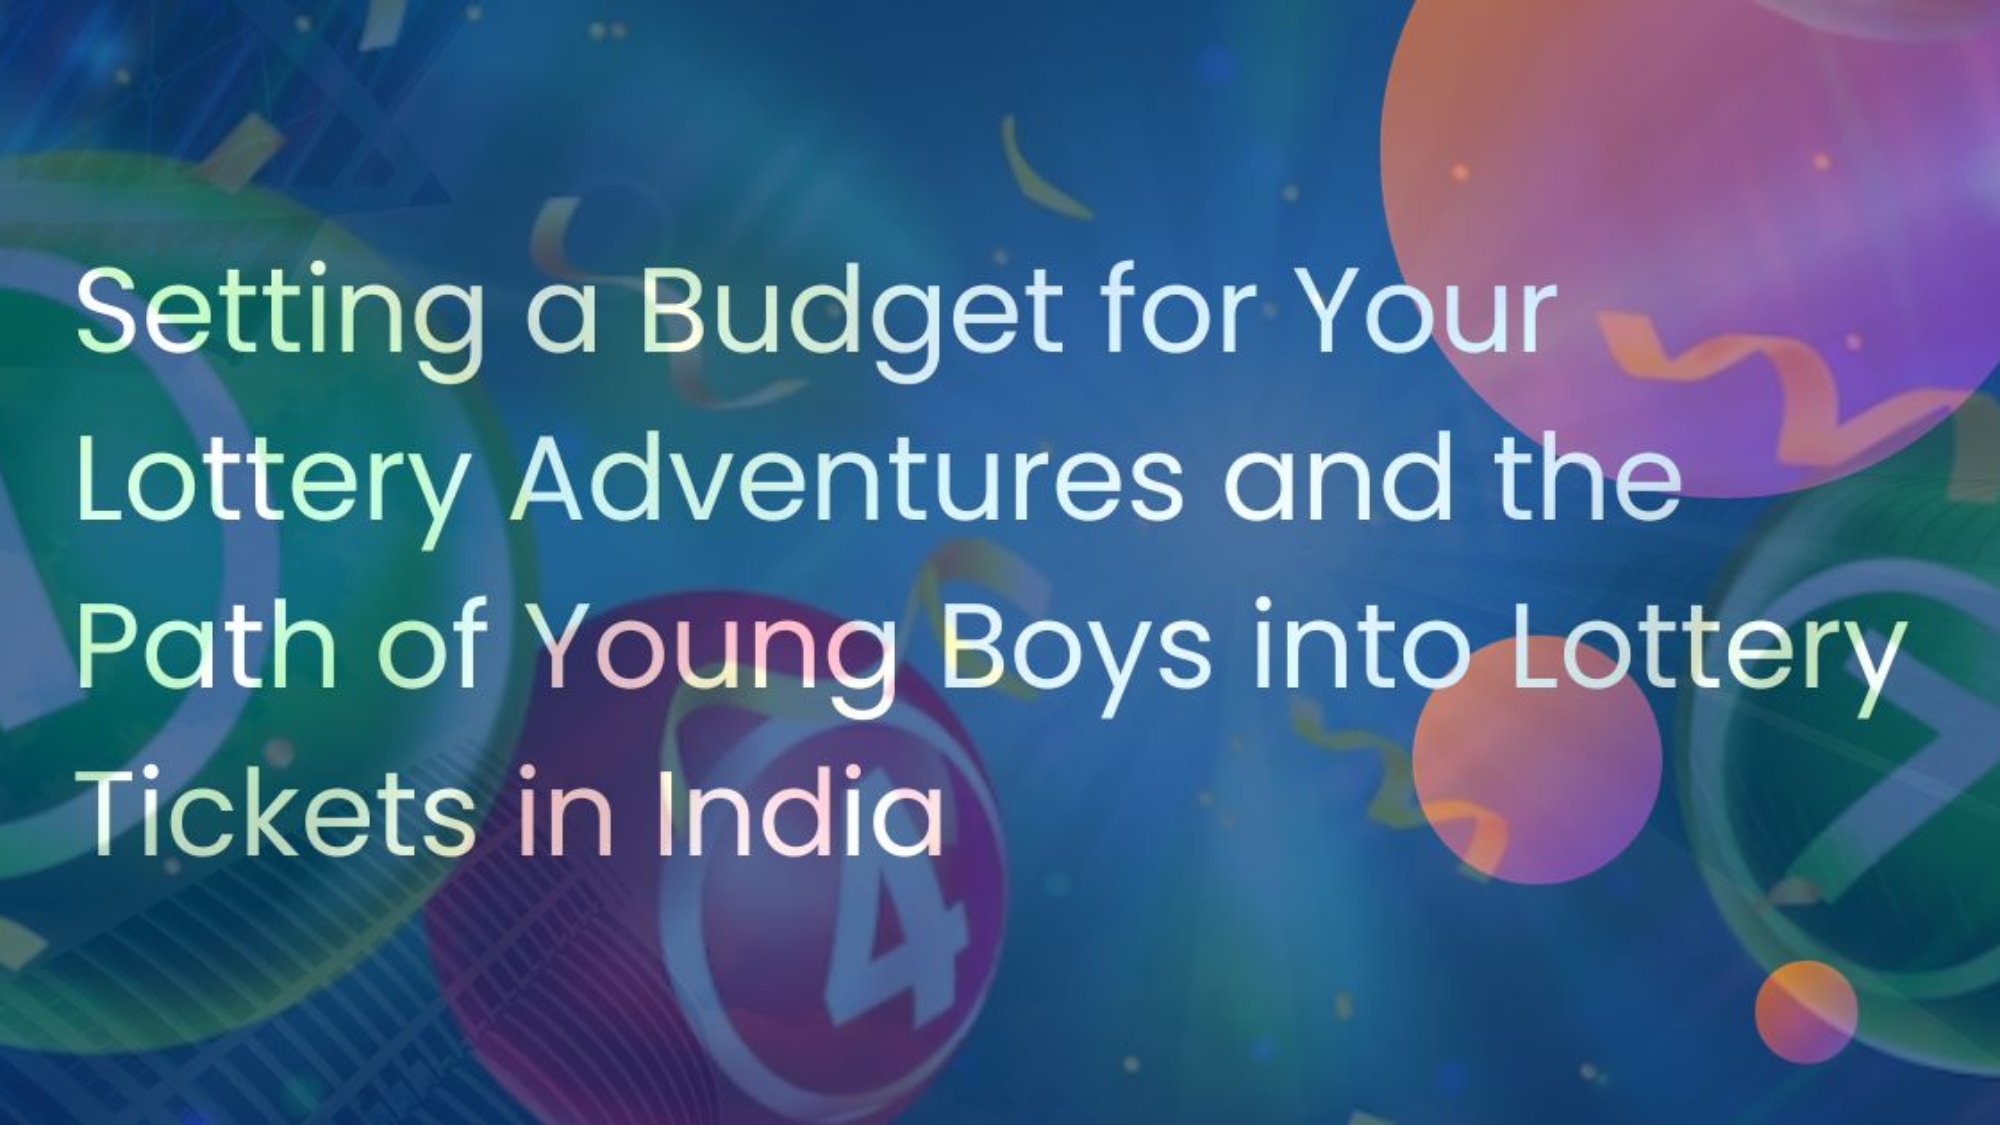 Setting a Budget for Your Lottery Adventures and the Path of Young Boys into Lottery Tickets in India